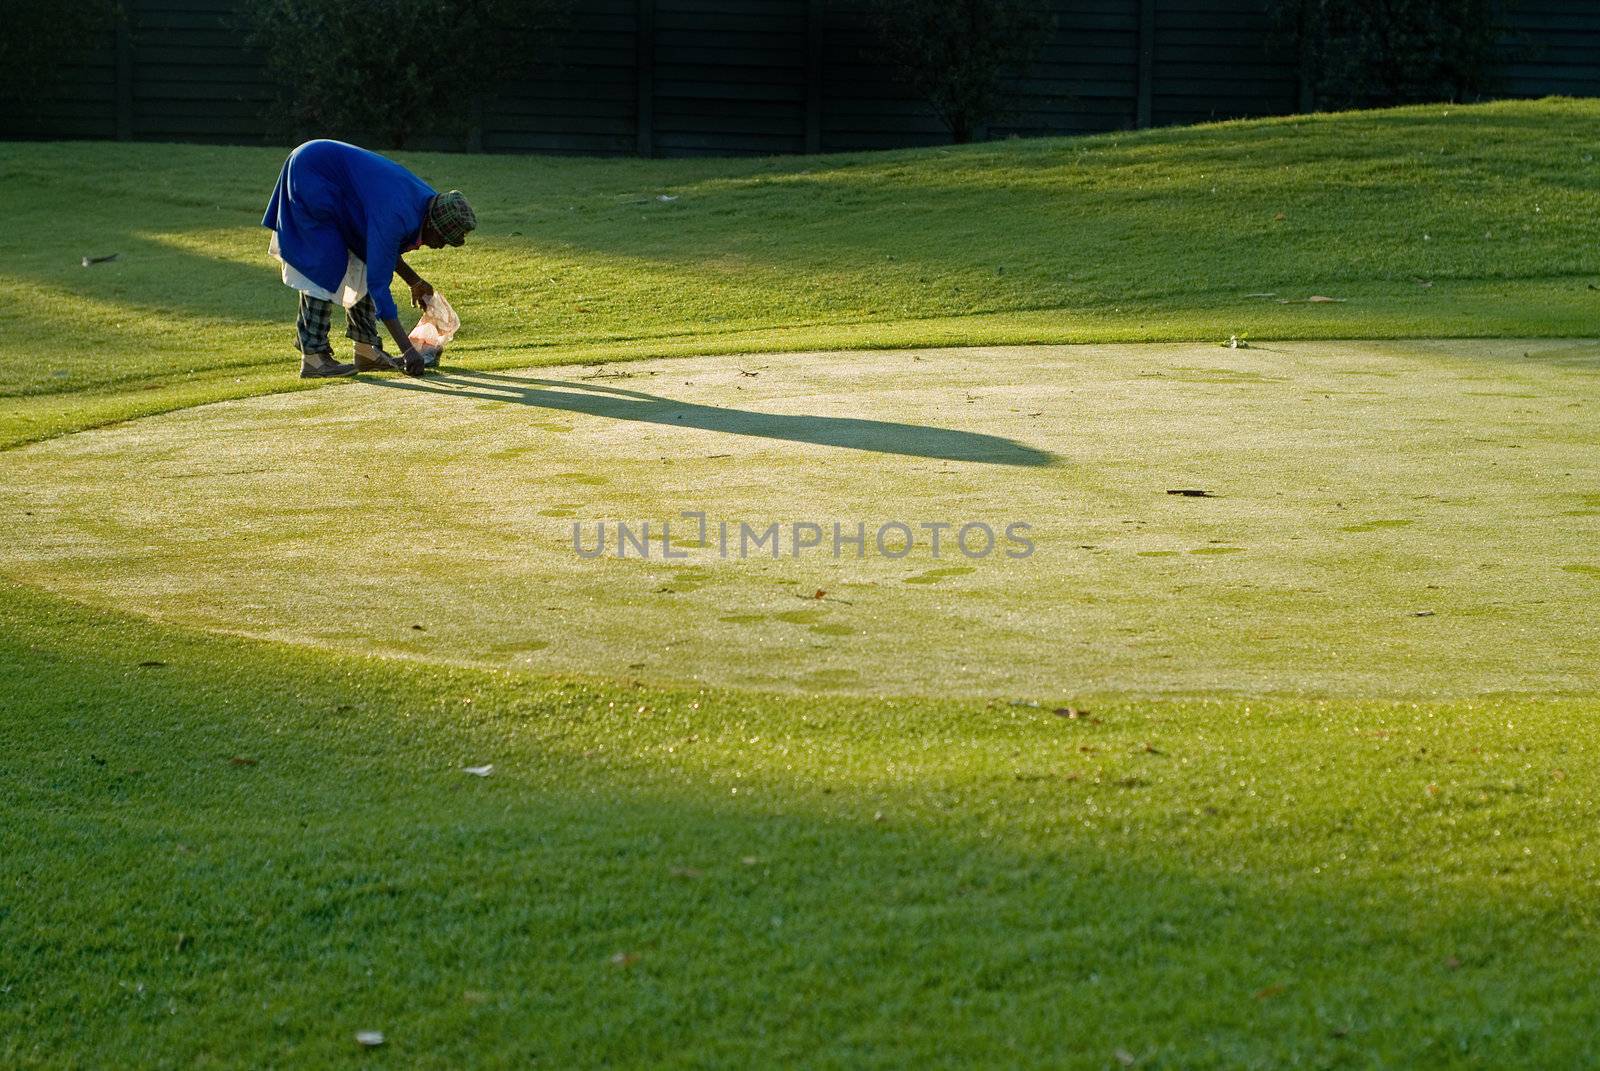 Golf green keeper or maintenance worker trims putting green edge in morning light.